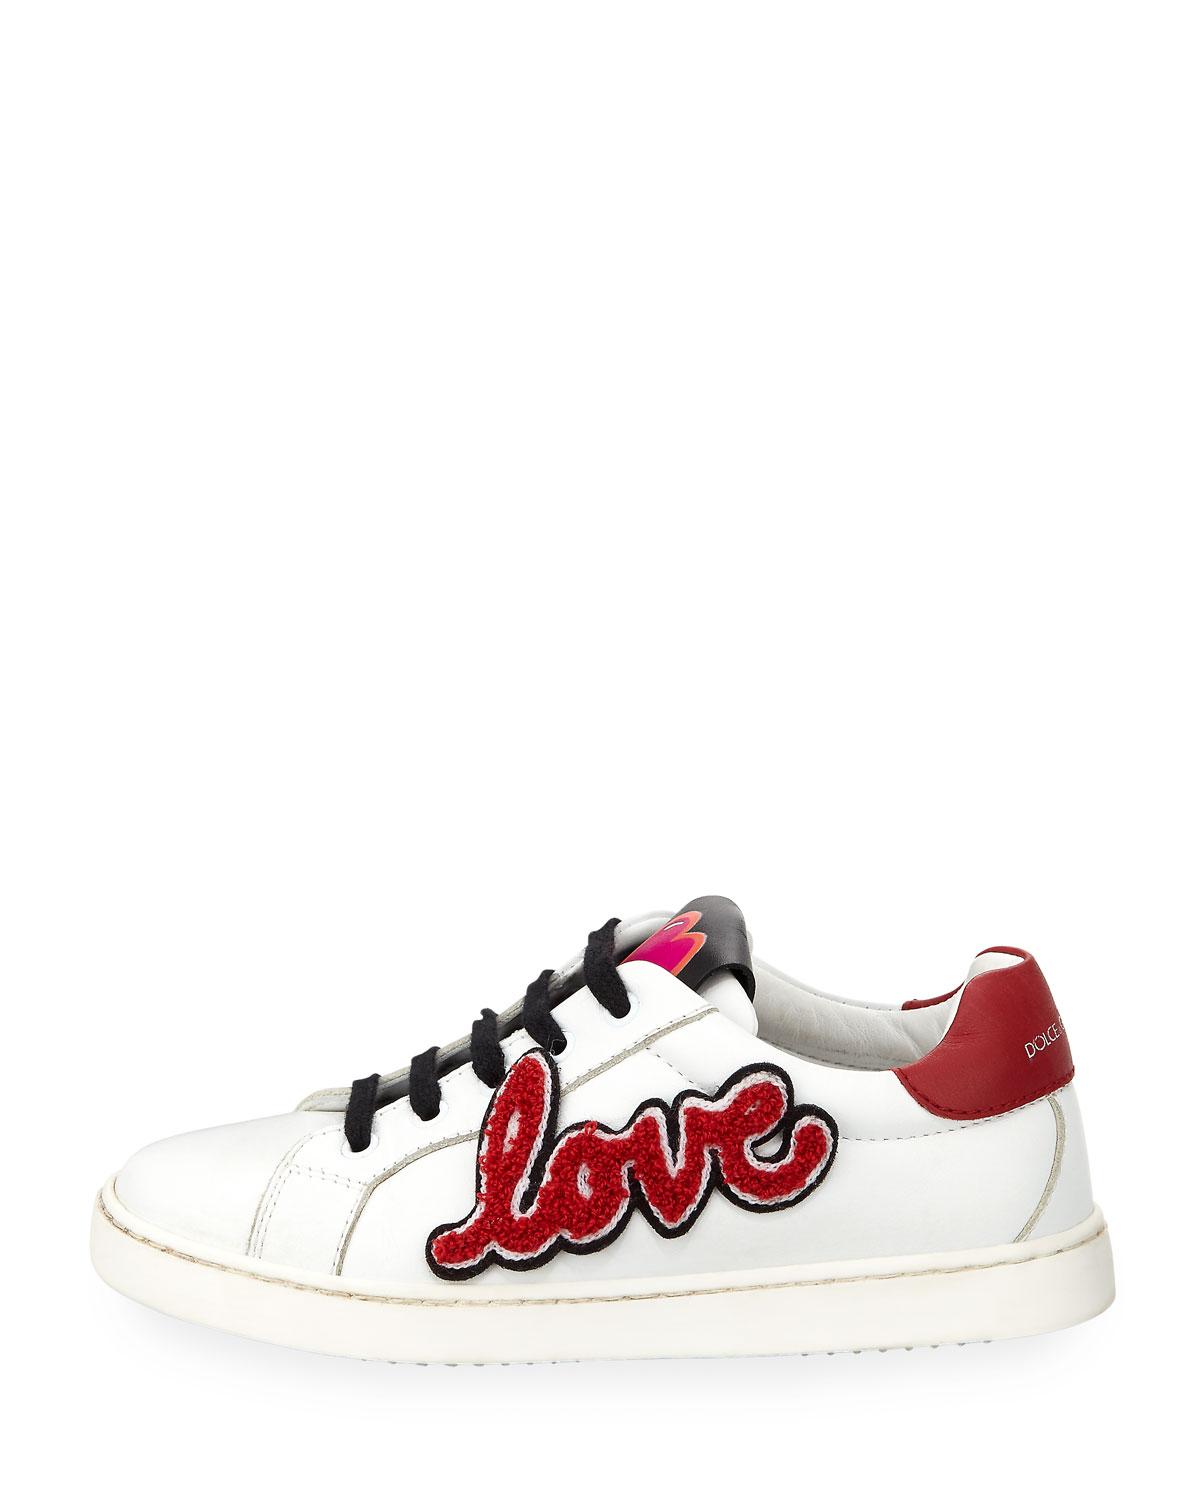 Dolce & Gabbana Leather Heart Love Sneakers in White - Lyst